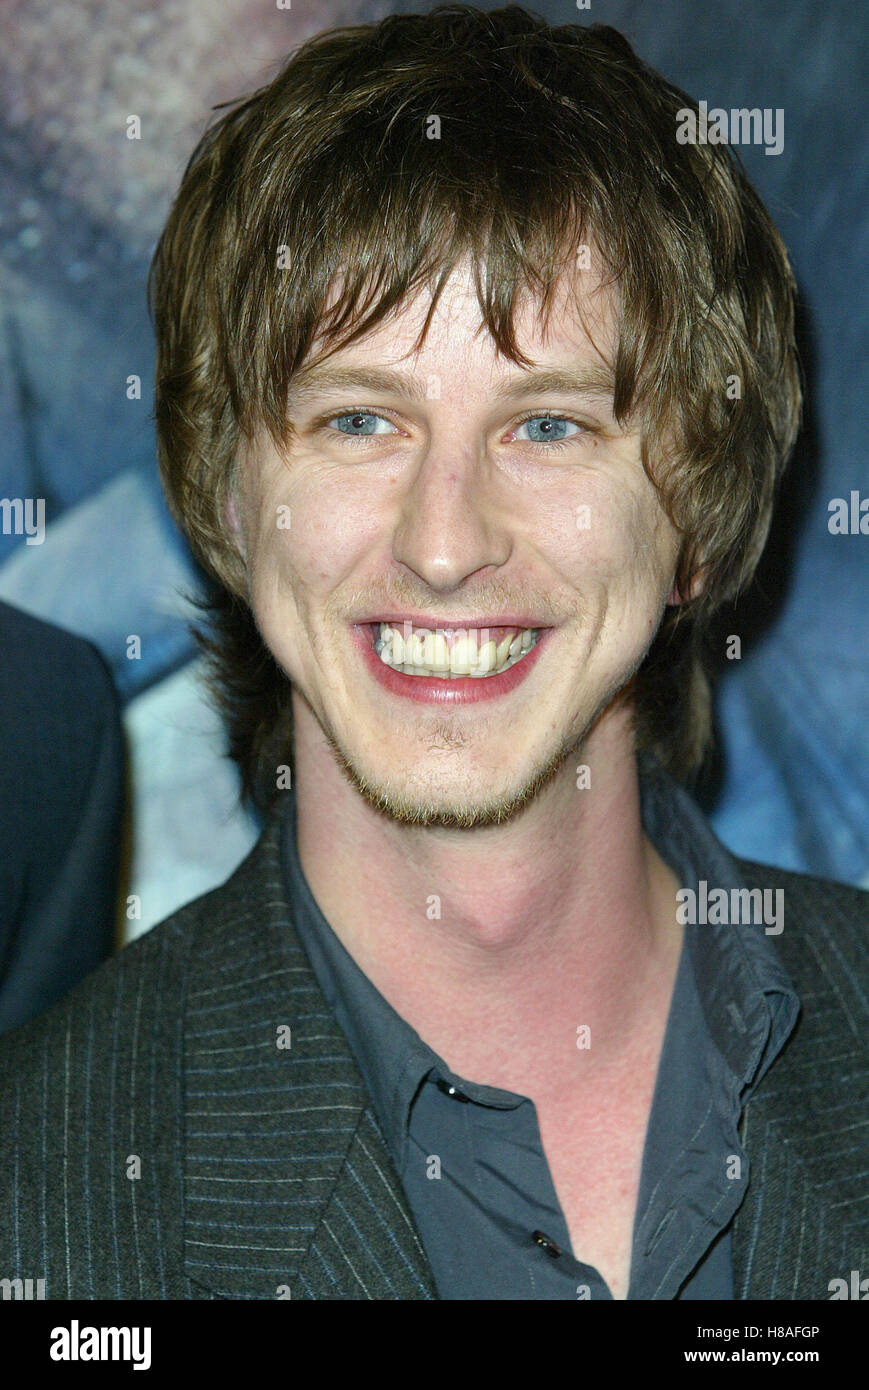 LEE INGLEBY MASTER & COMMANDER: THE FAR SI ACADEMY OF MOTION PICTURE ARTS BEVERLY HILLS LOS ANGELES U 11. November 2003 Stockfoto